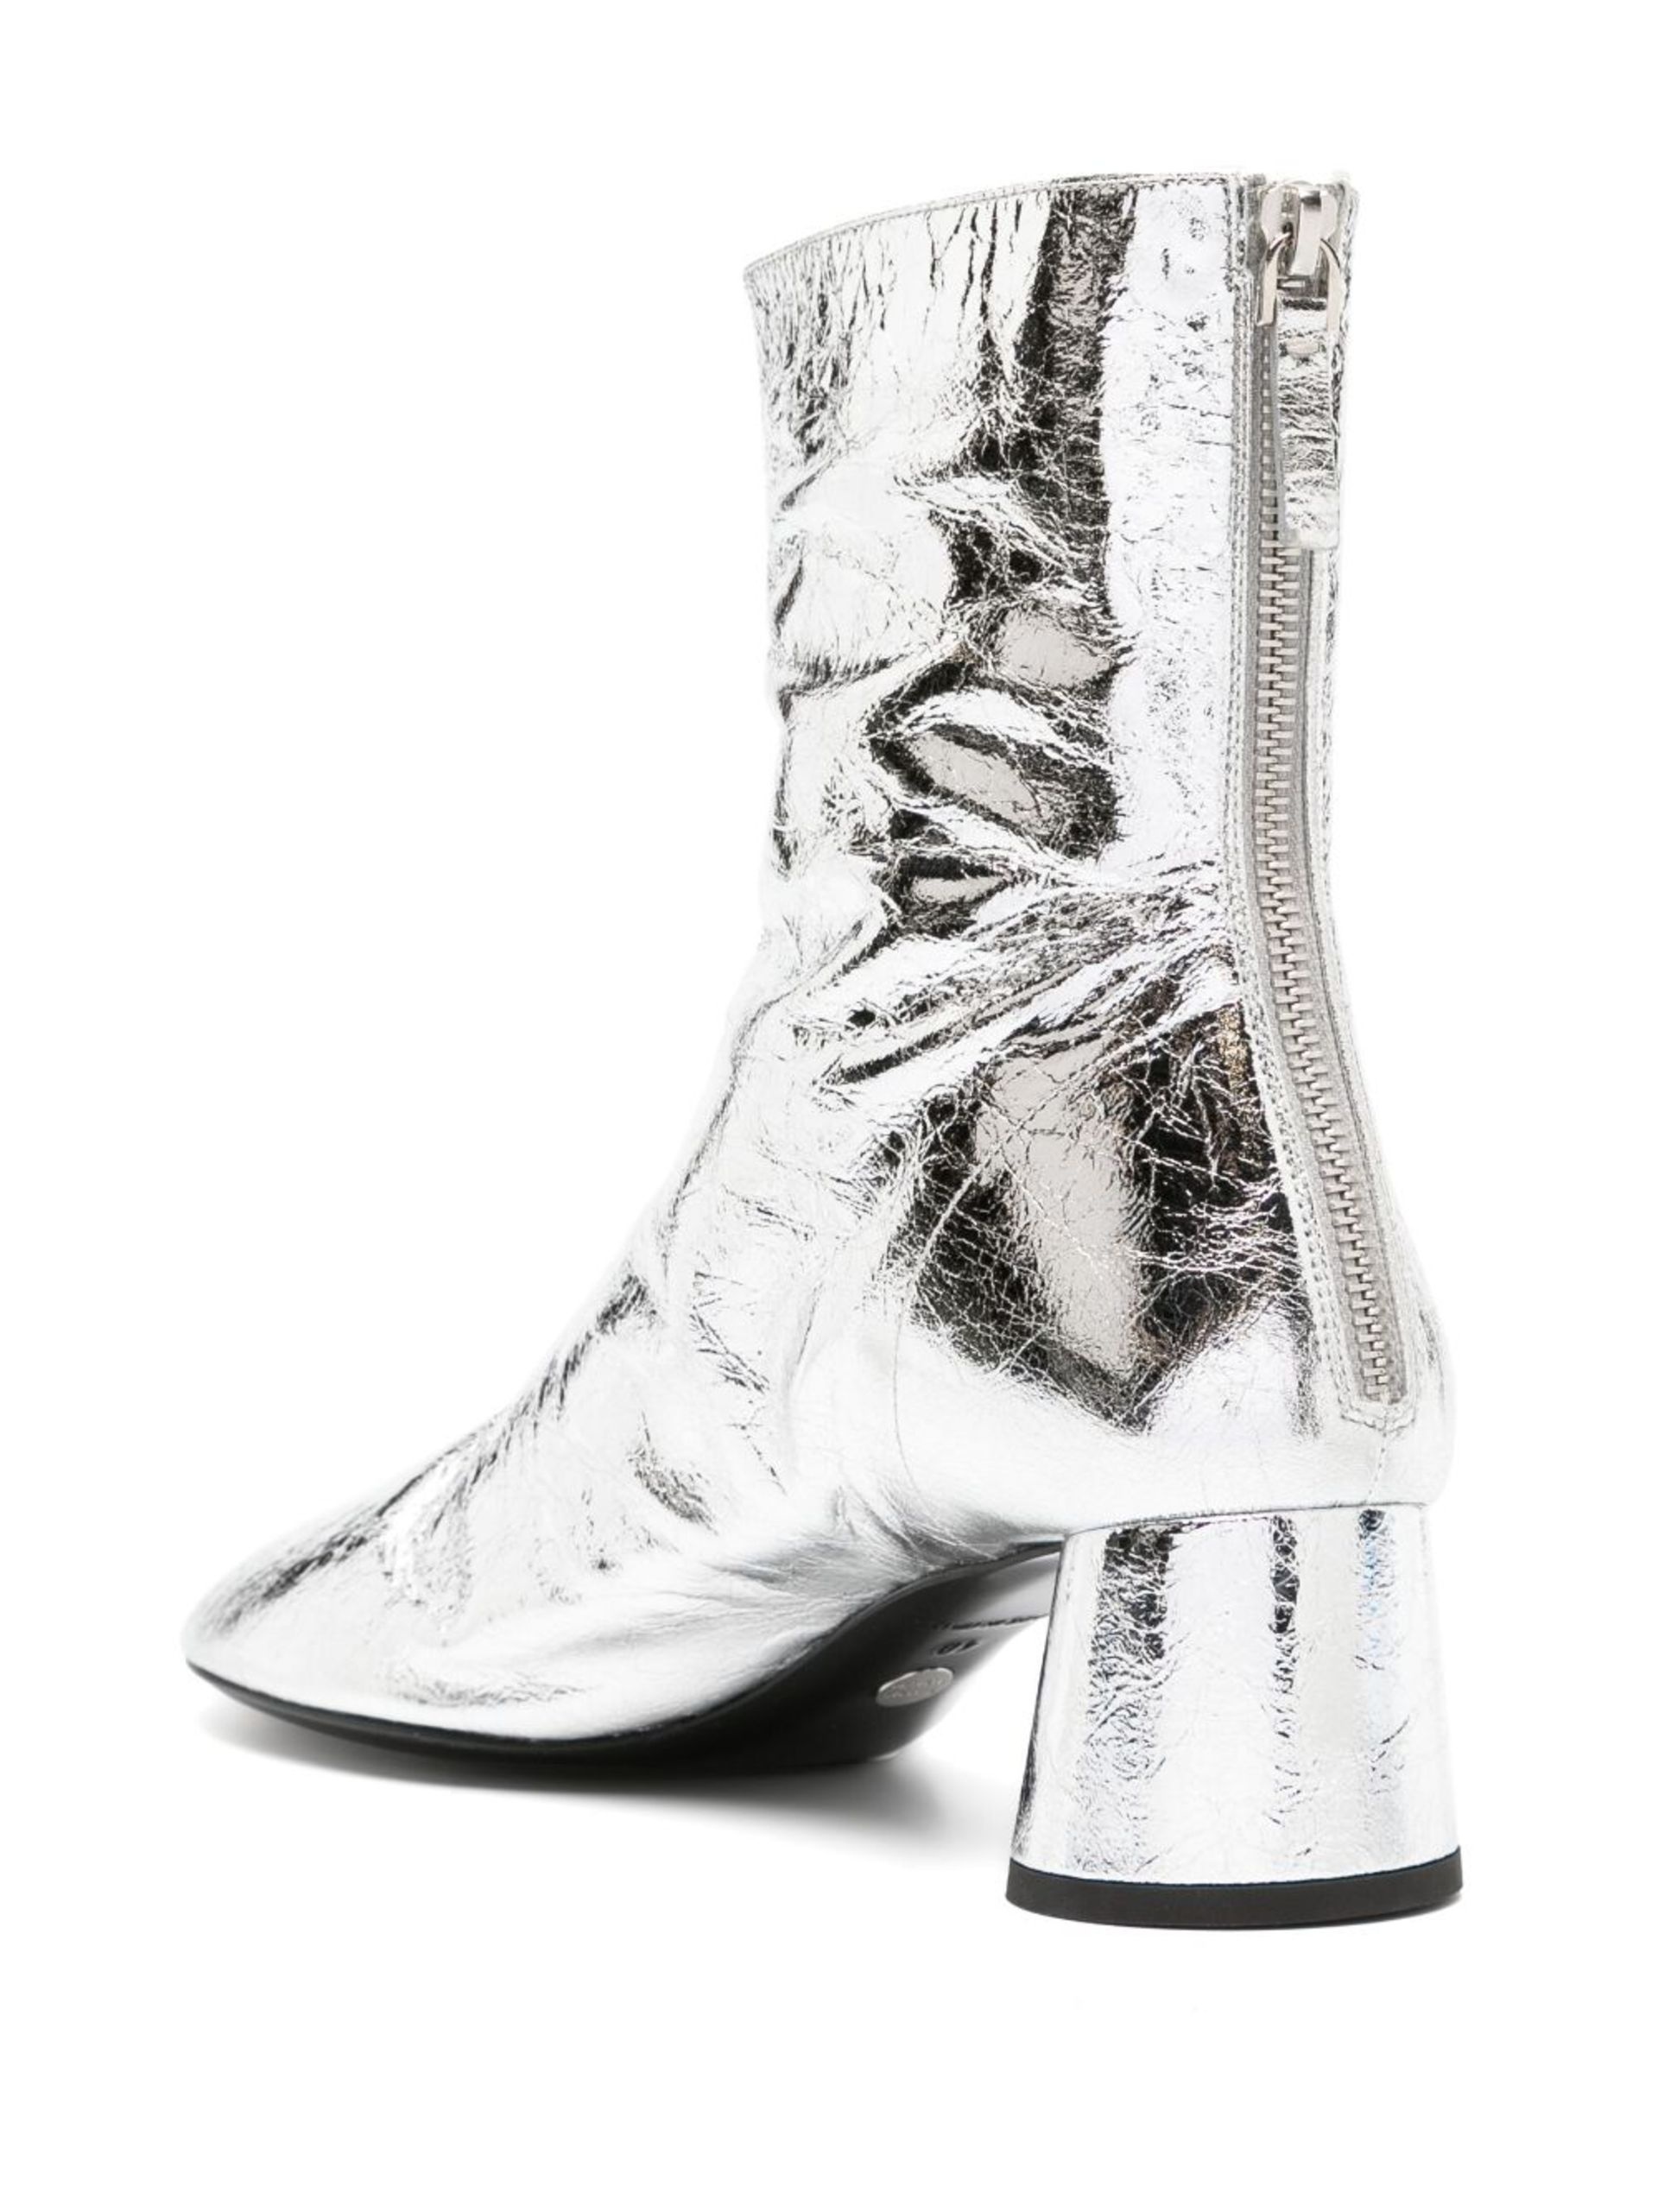 silver Glove 55 leather ankle boots - 3